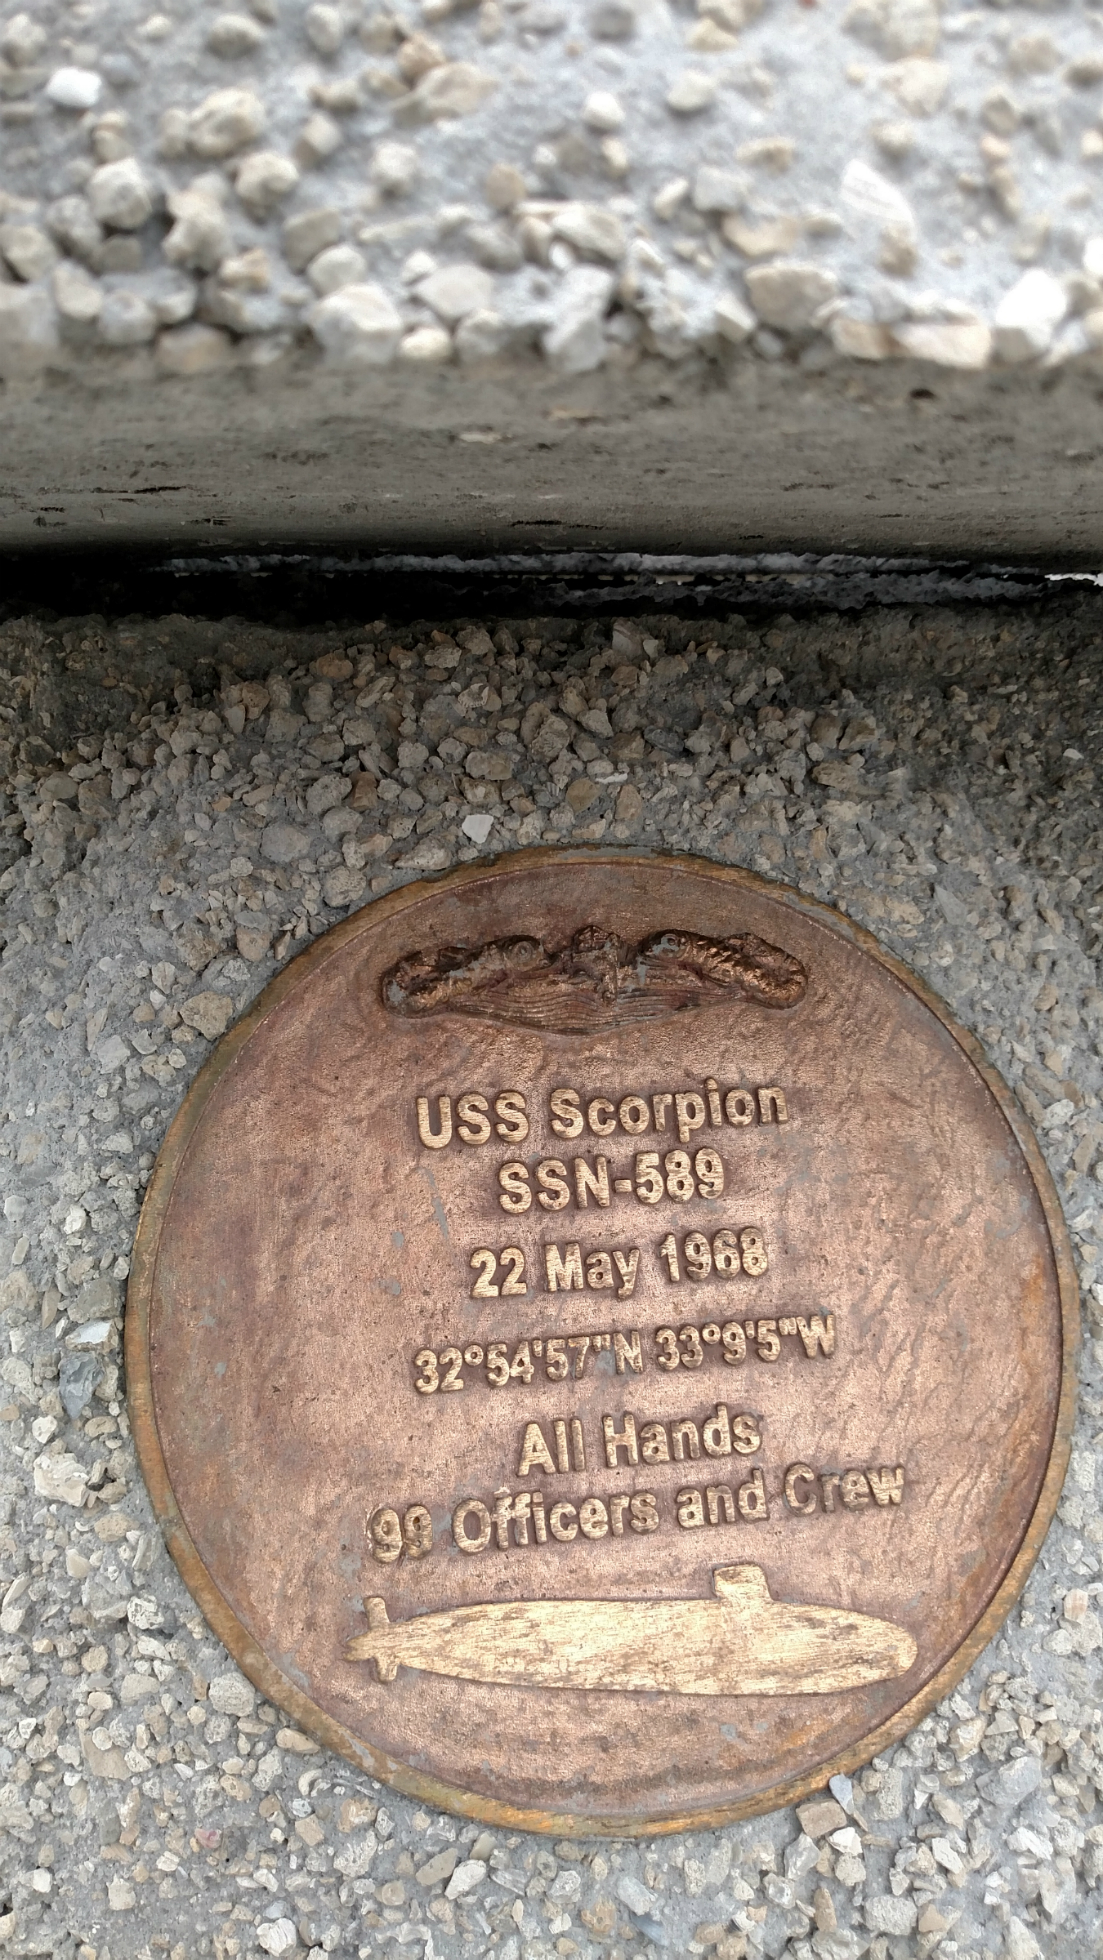 The first reefs in the On Eternal Patrol Memorial Reef will be deployed on May 22, 51 years after the loss of the USS Scorpion, the last submarine to go On Eternal Patrol with 99 officers and crew.